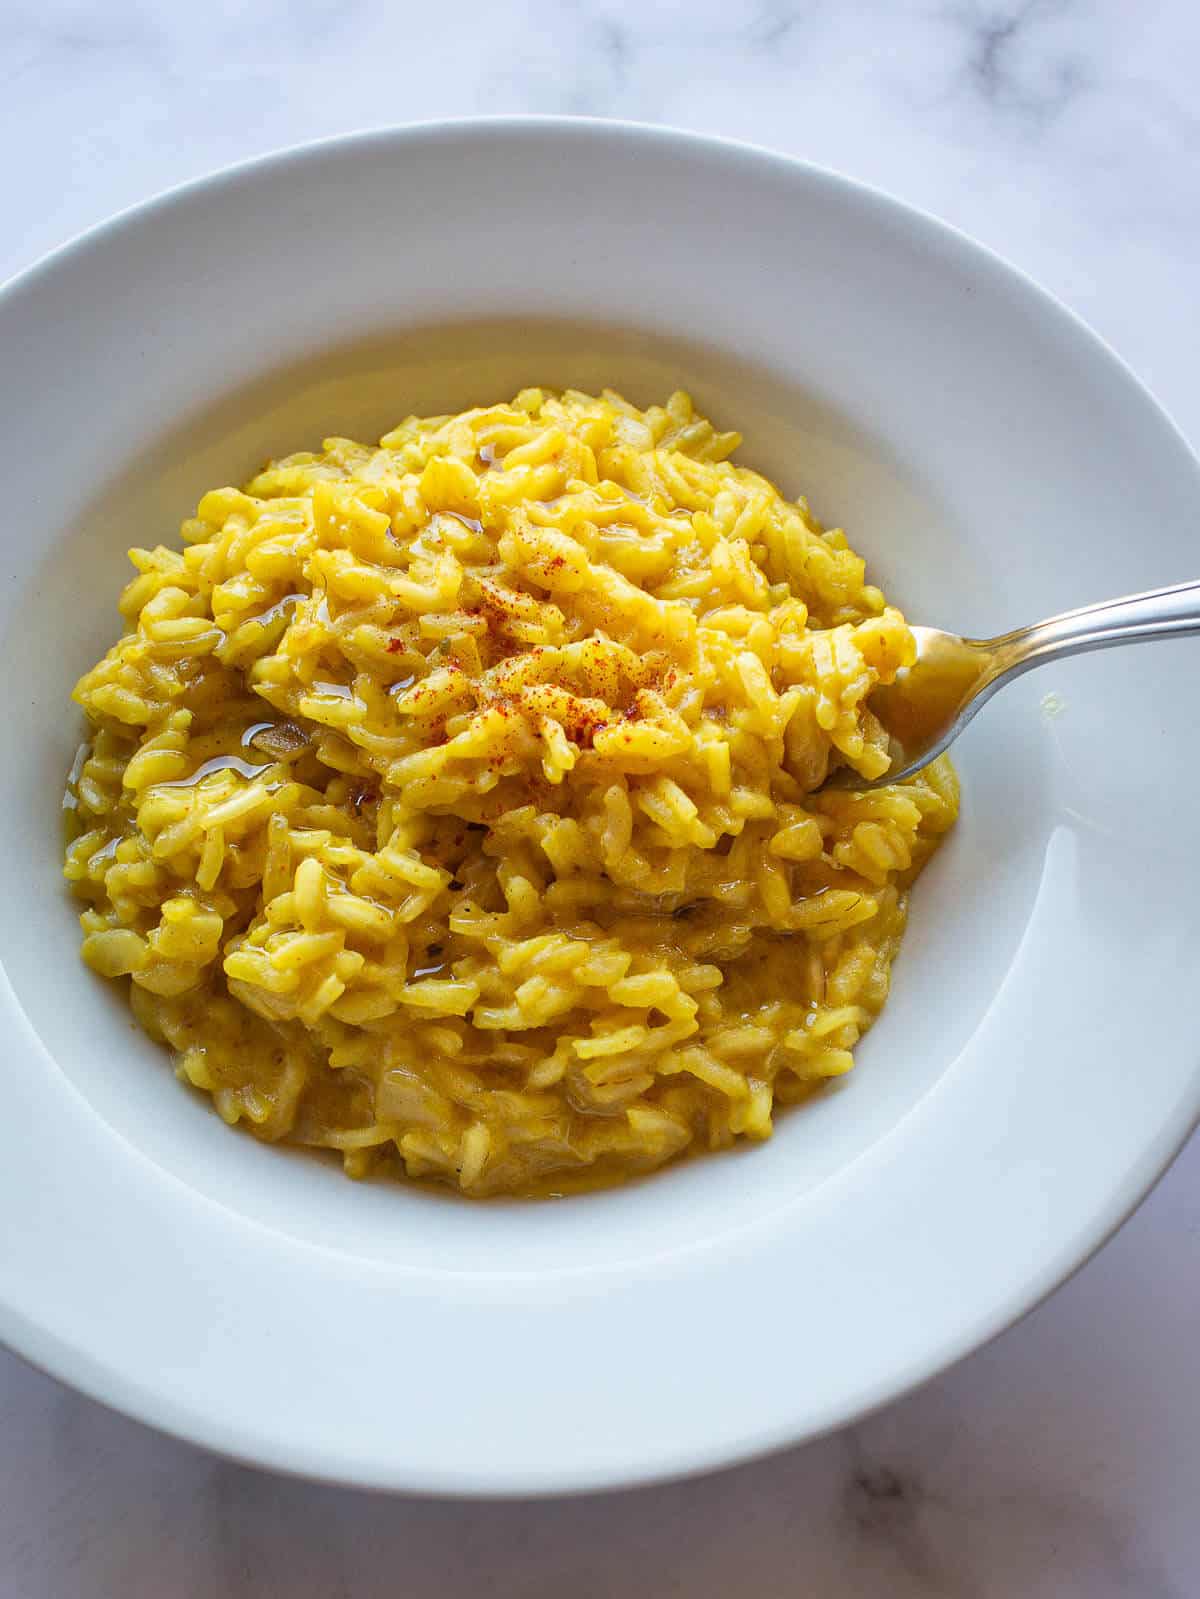 saffron risotto one of the must-eats in Italy